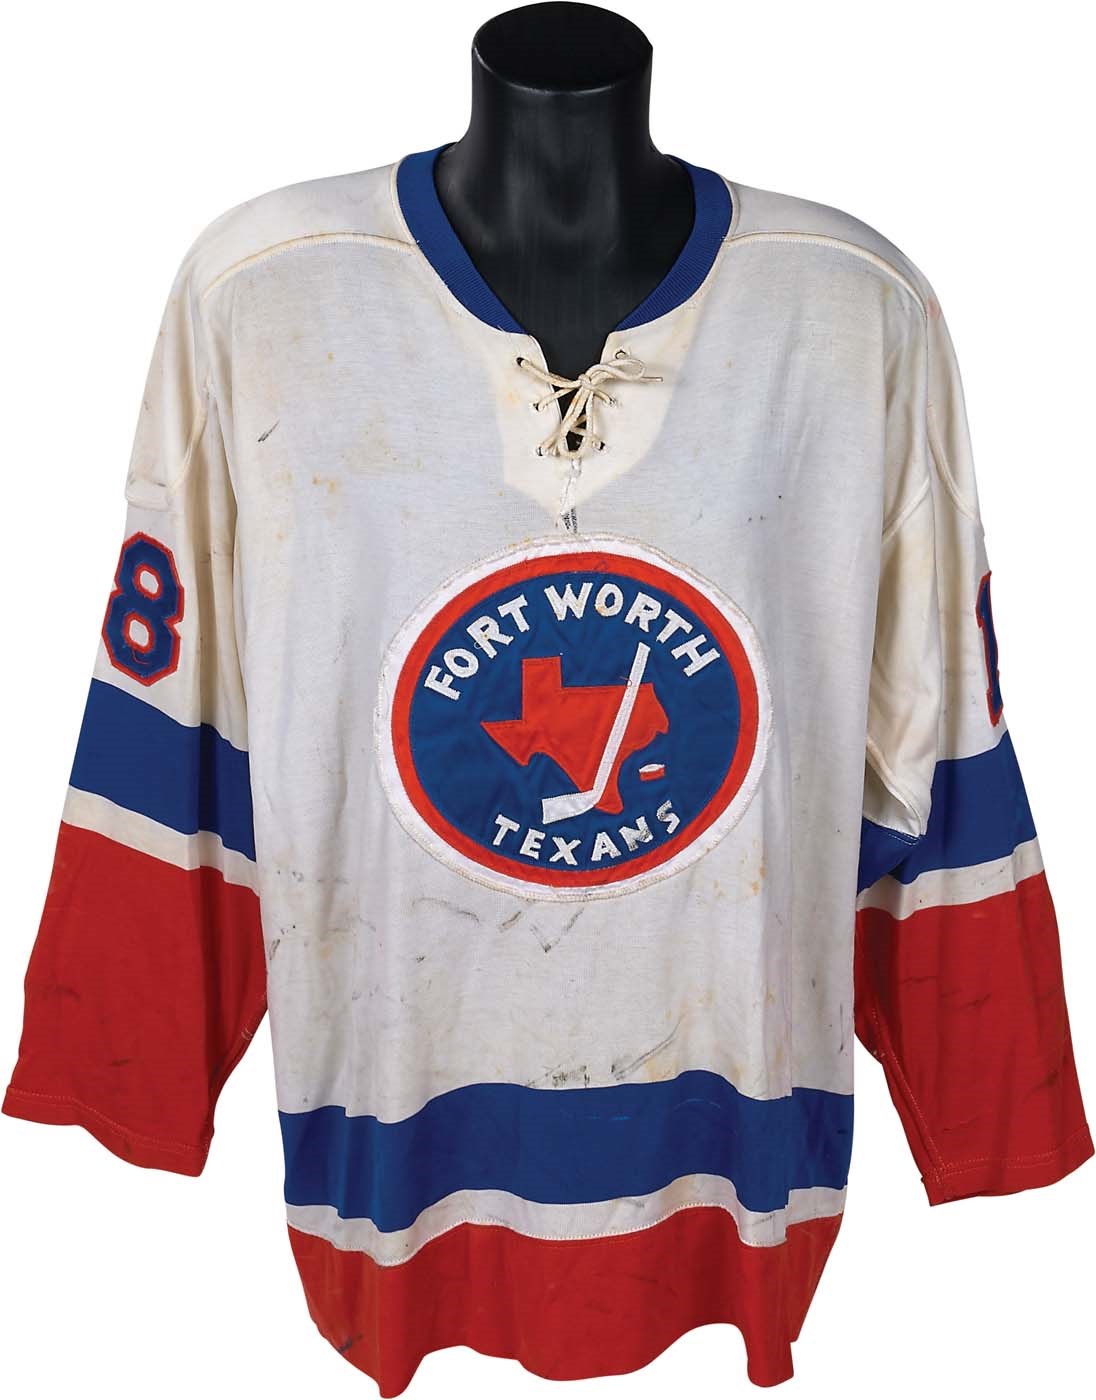 Hockey - 1970s Fort Worth Texans #18 Game Worn Jersey - Possible Ed Westfall Recycled Islanders Jersey